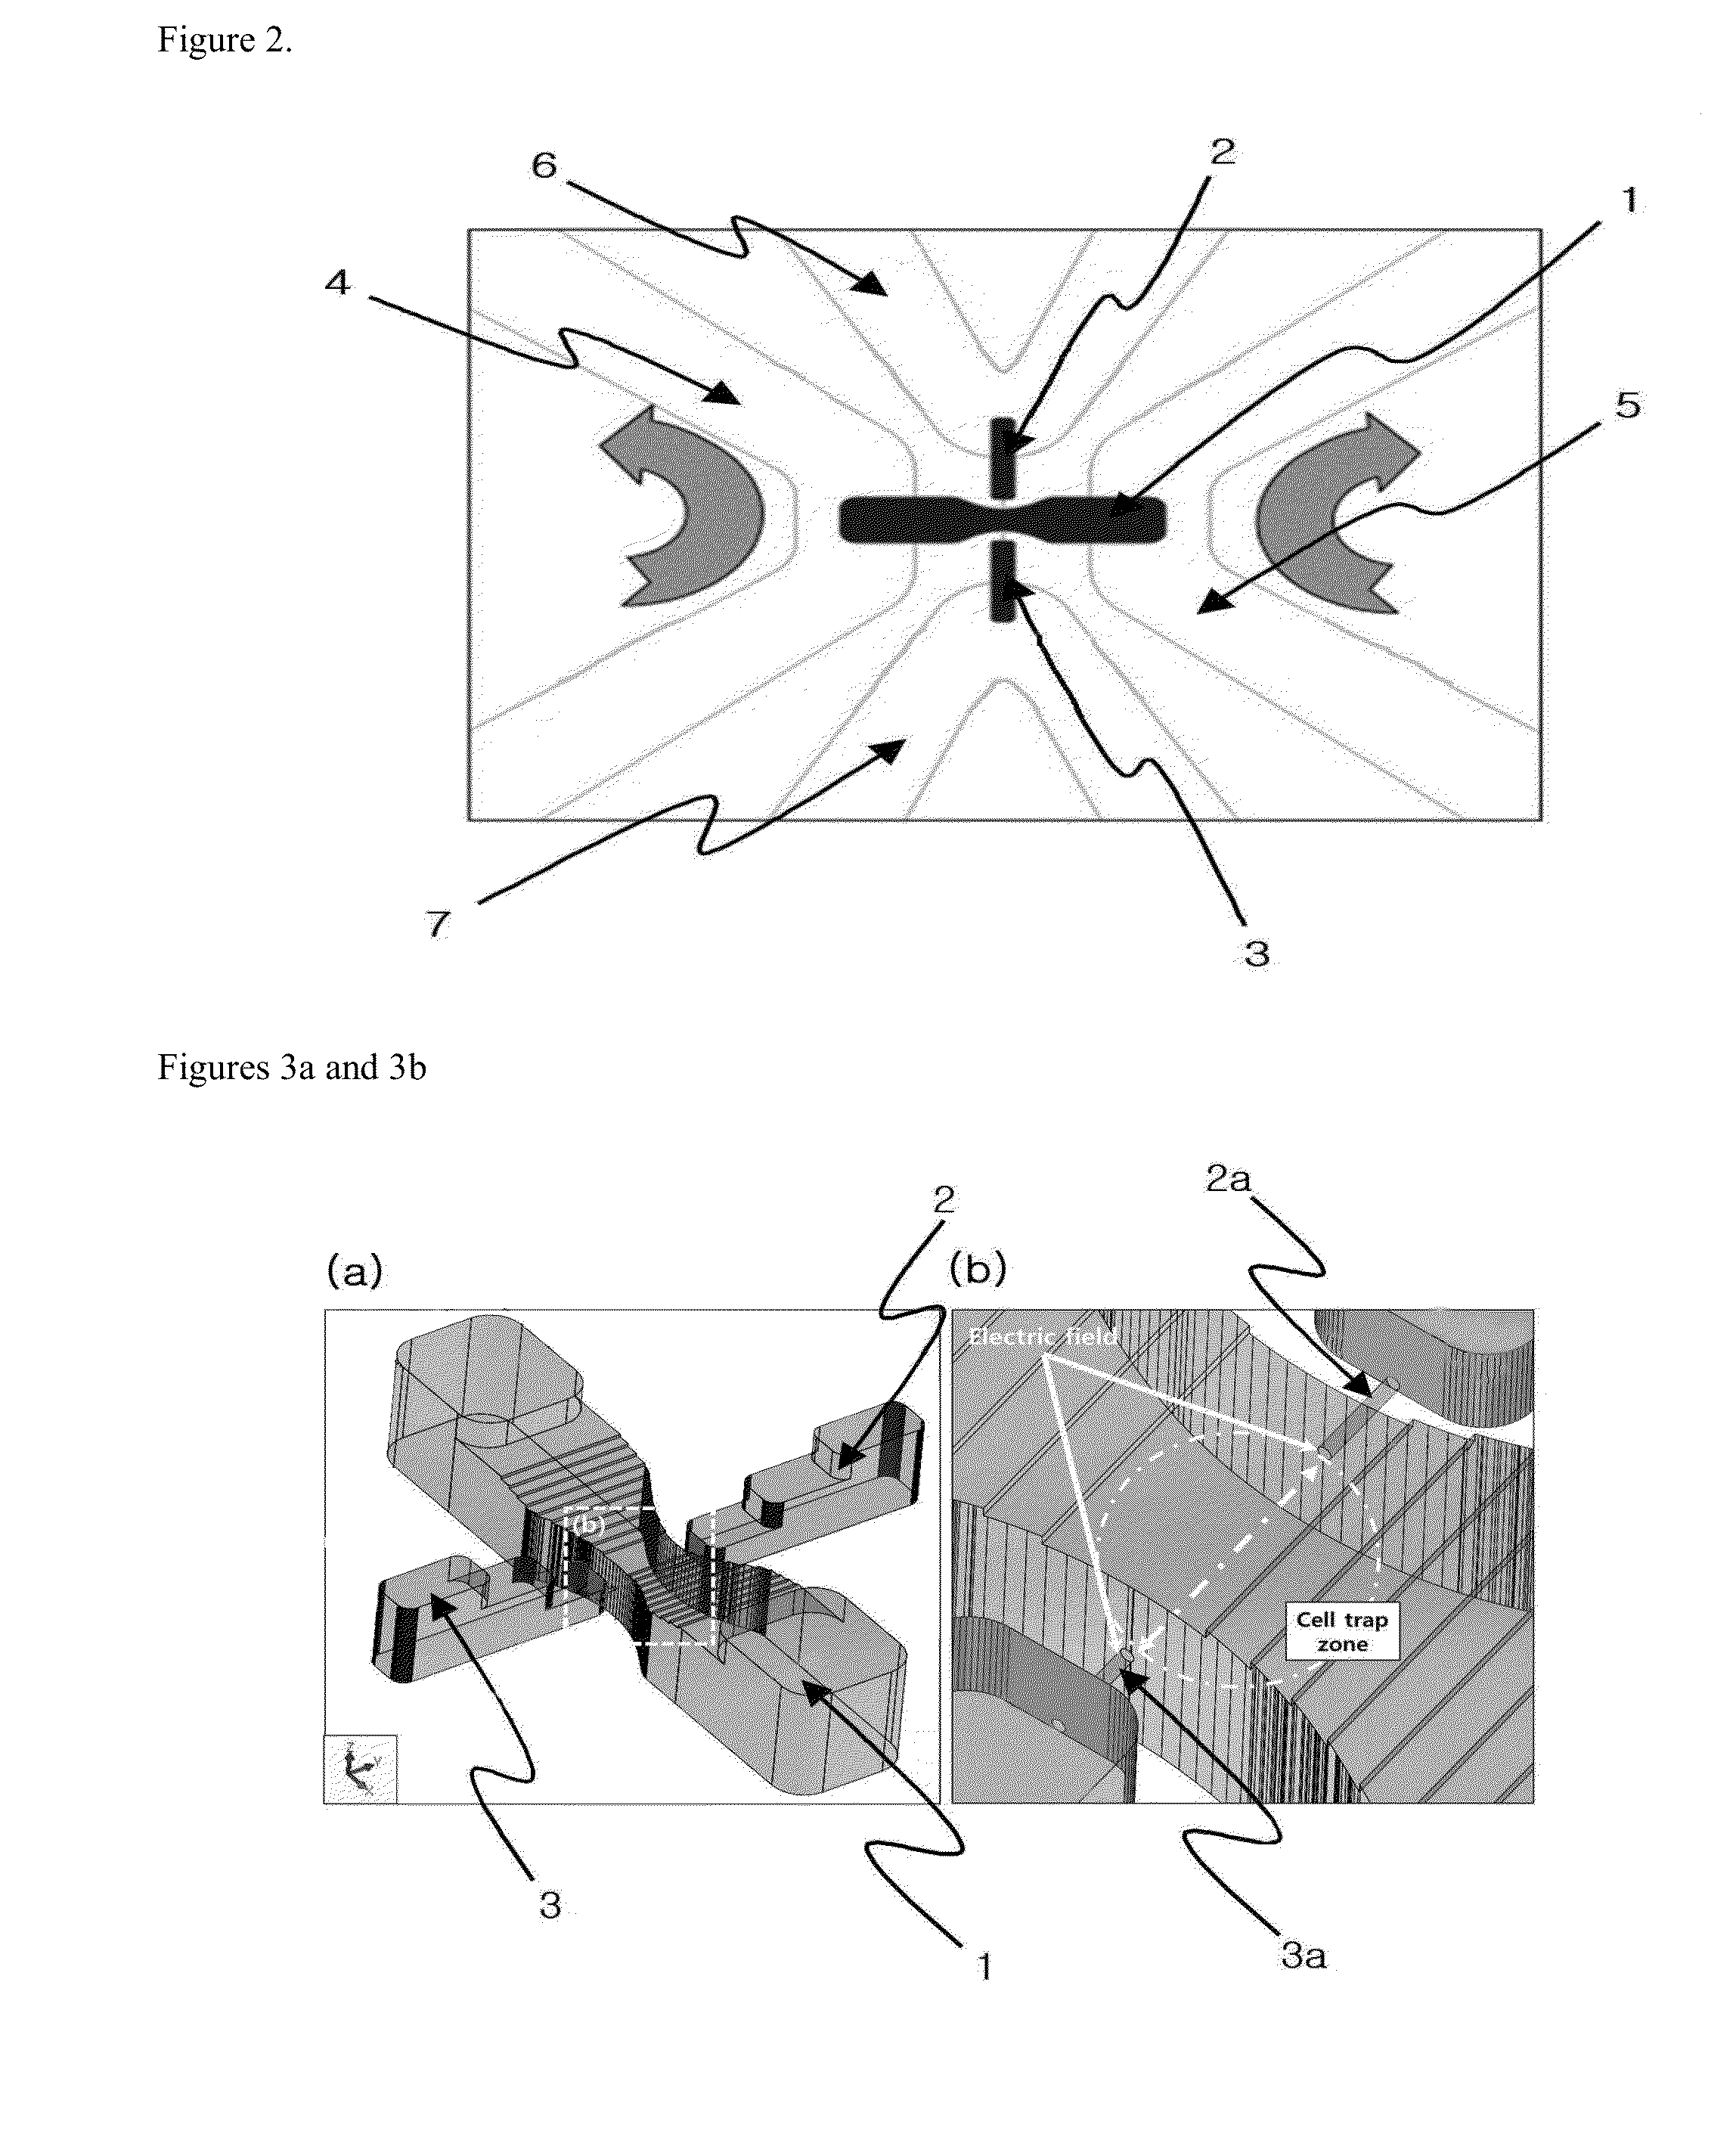 Process for modifying a cell by putting material into the cell